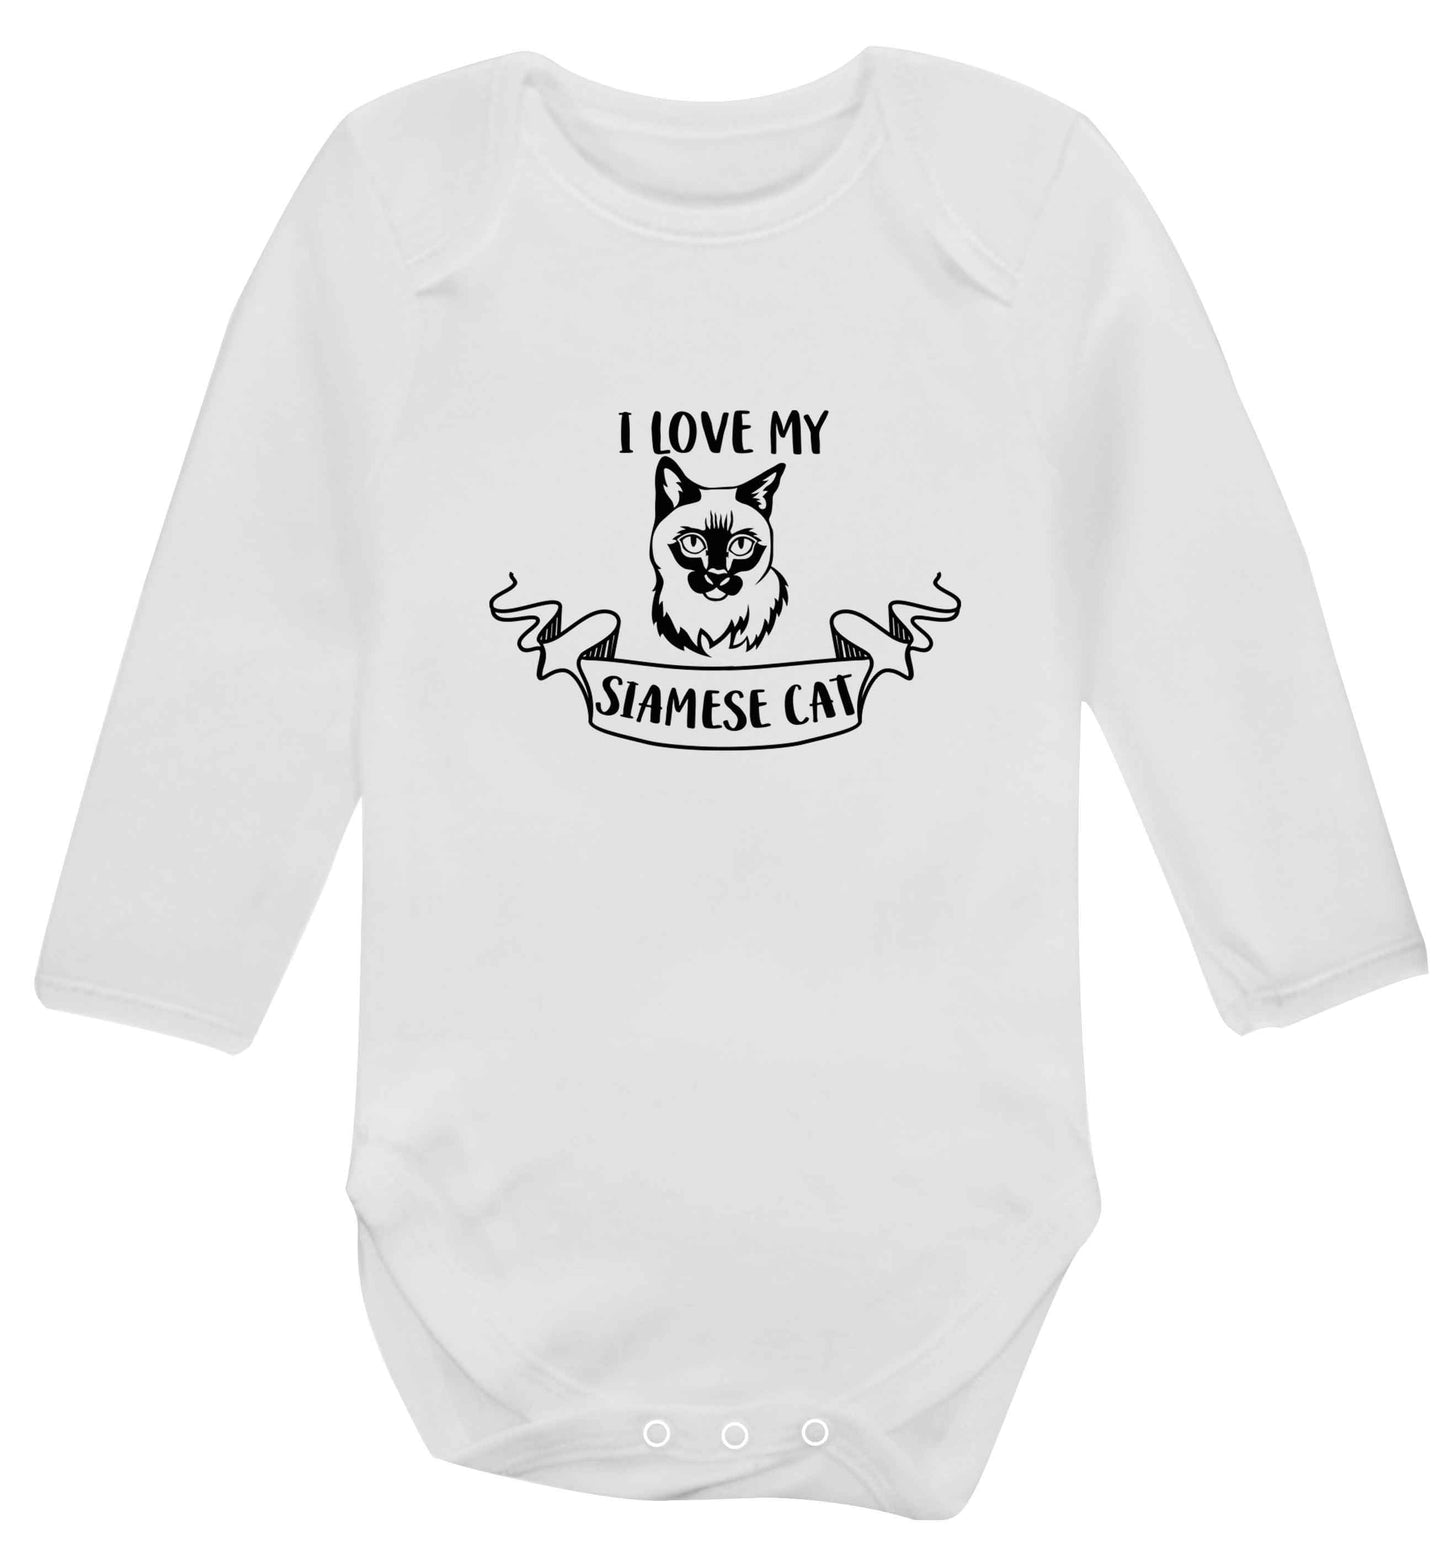 I love my siamese cat baby vest long sleeved white 6-12 months